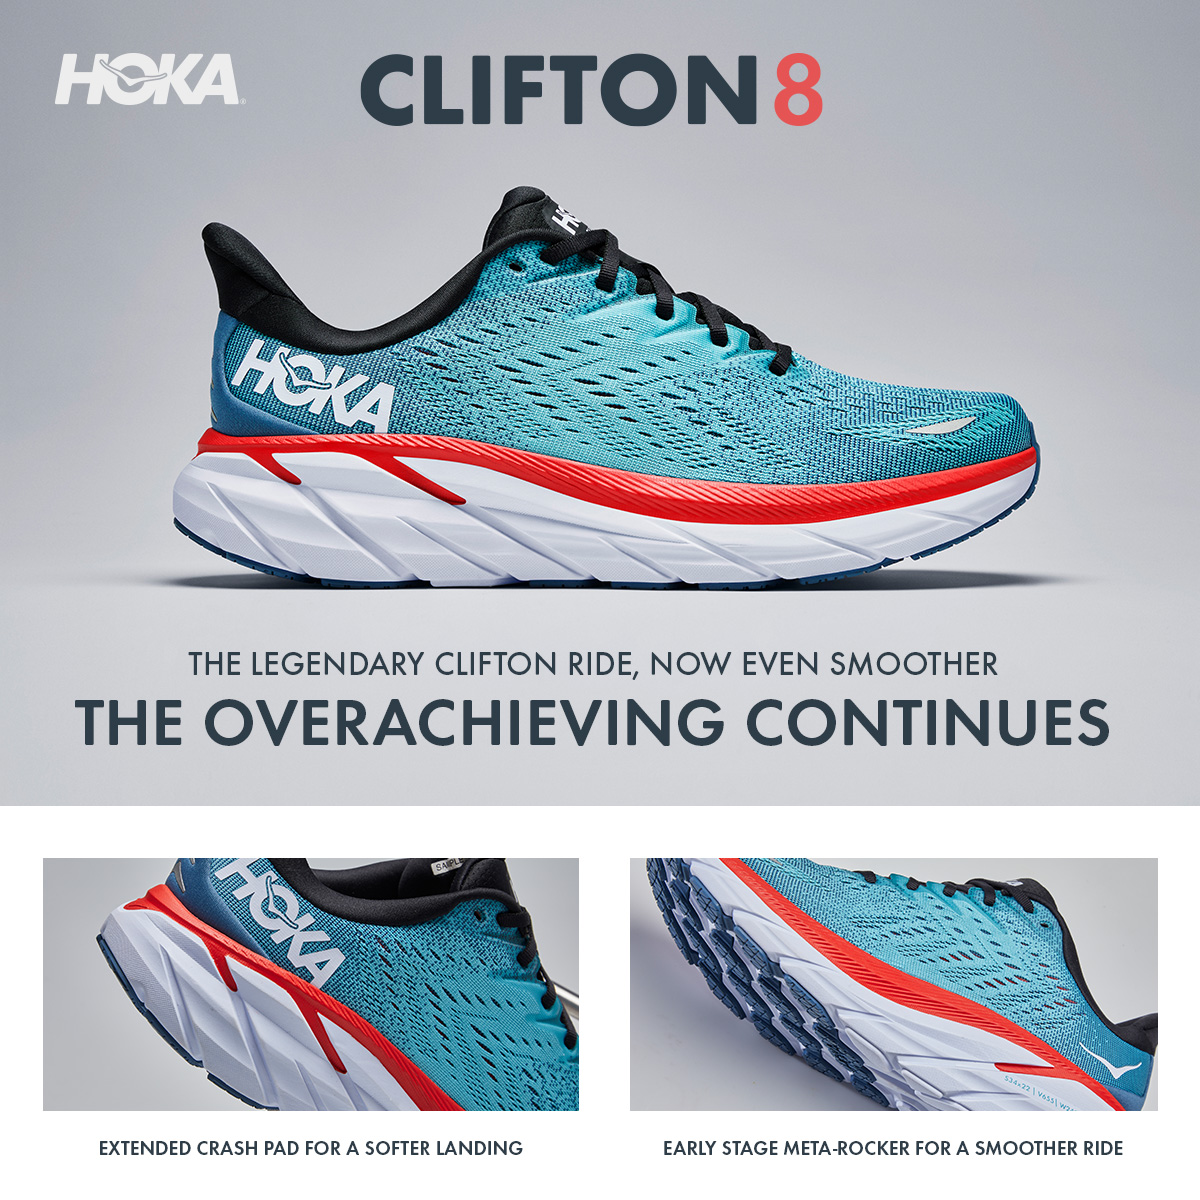 HOKA CLIFTON 8: THE OVERACHIEVING CONTINUES